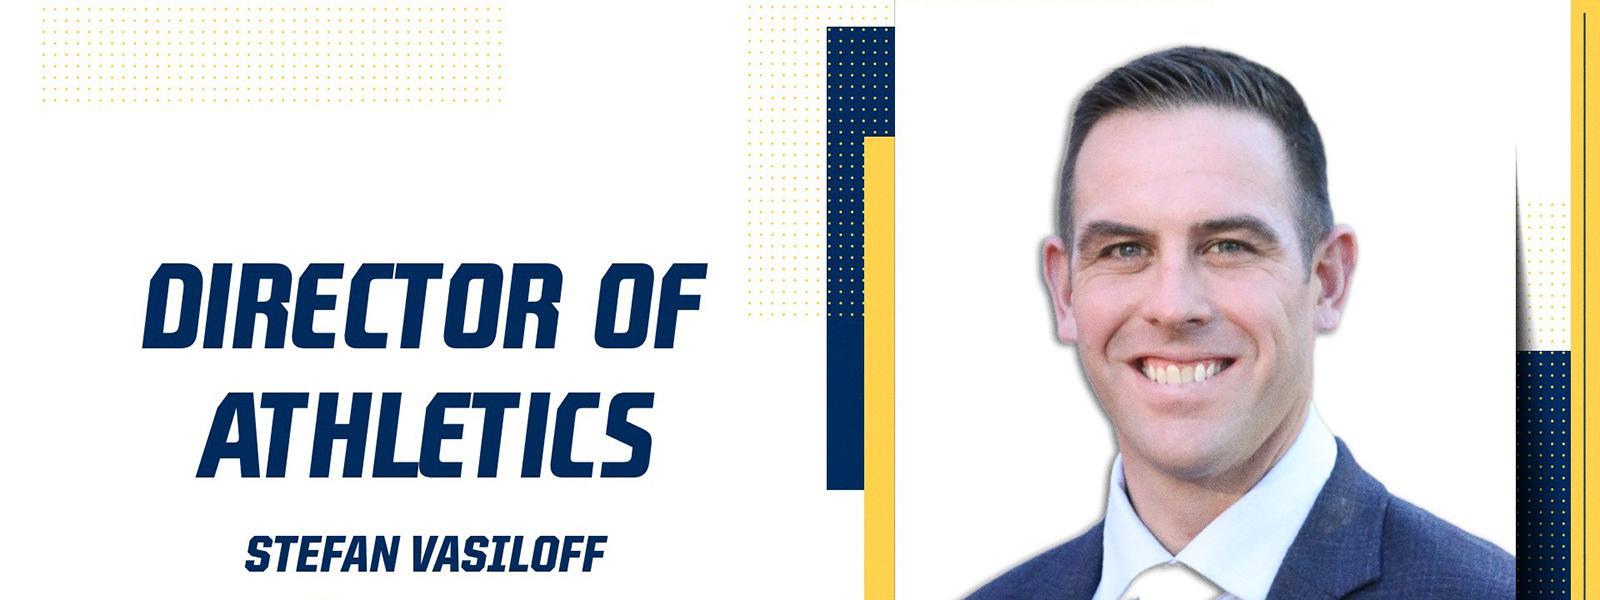 Stefan Vasiloff previously served as CIU's assistant athletic director for game day operations and facilities, and most recently, provided leadership as interim athletics director. 